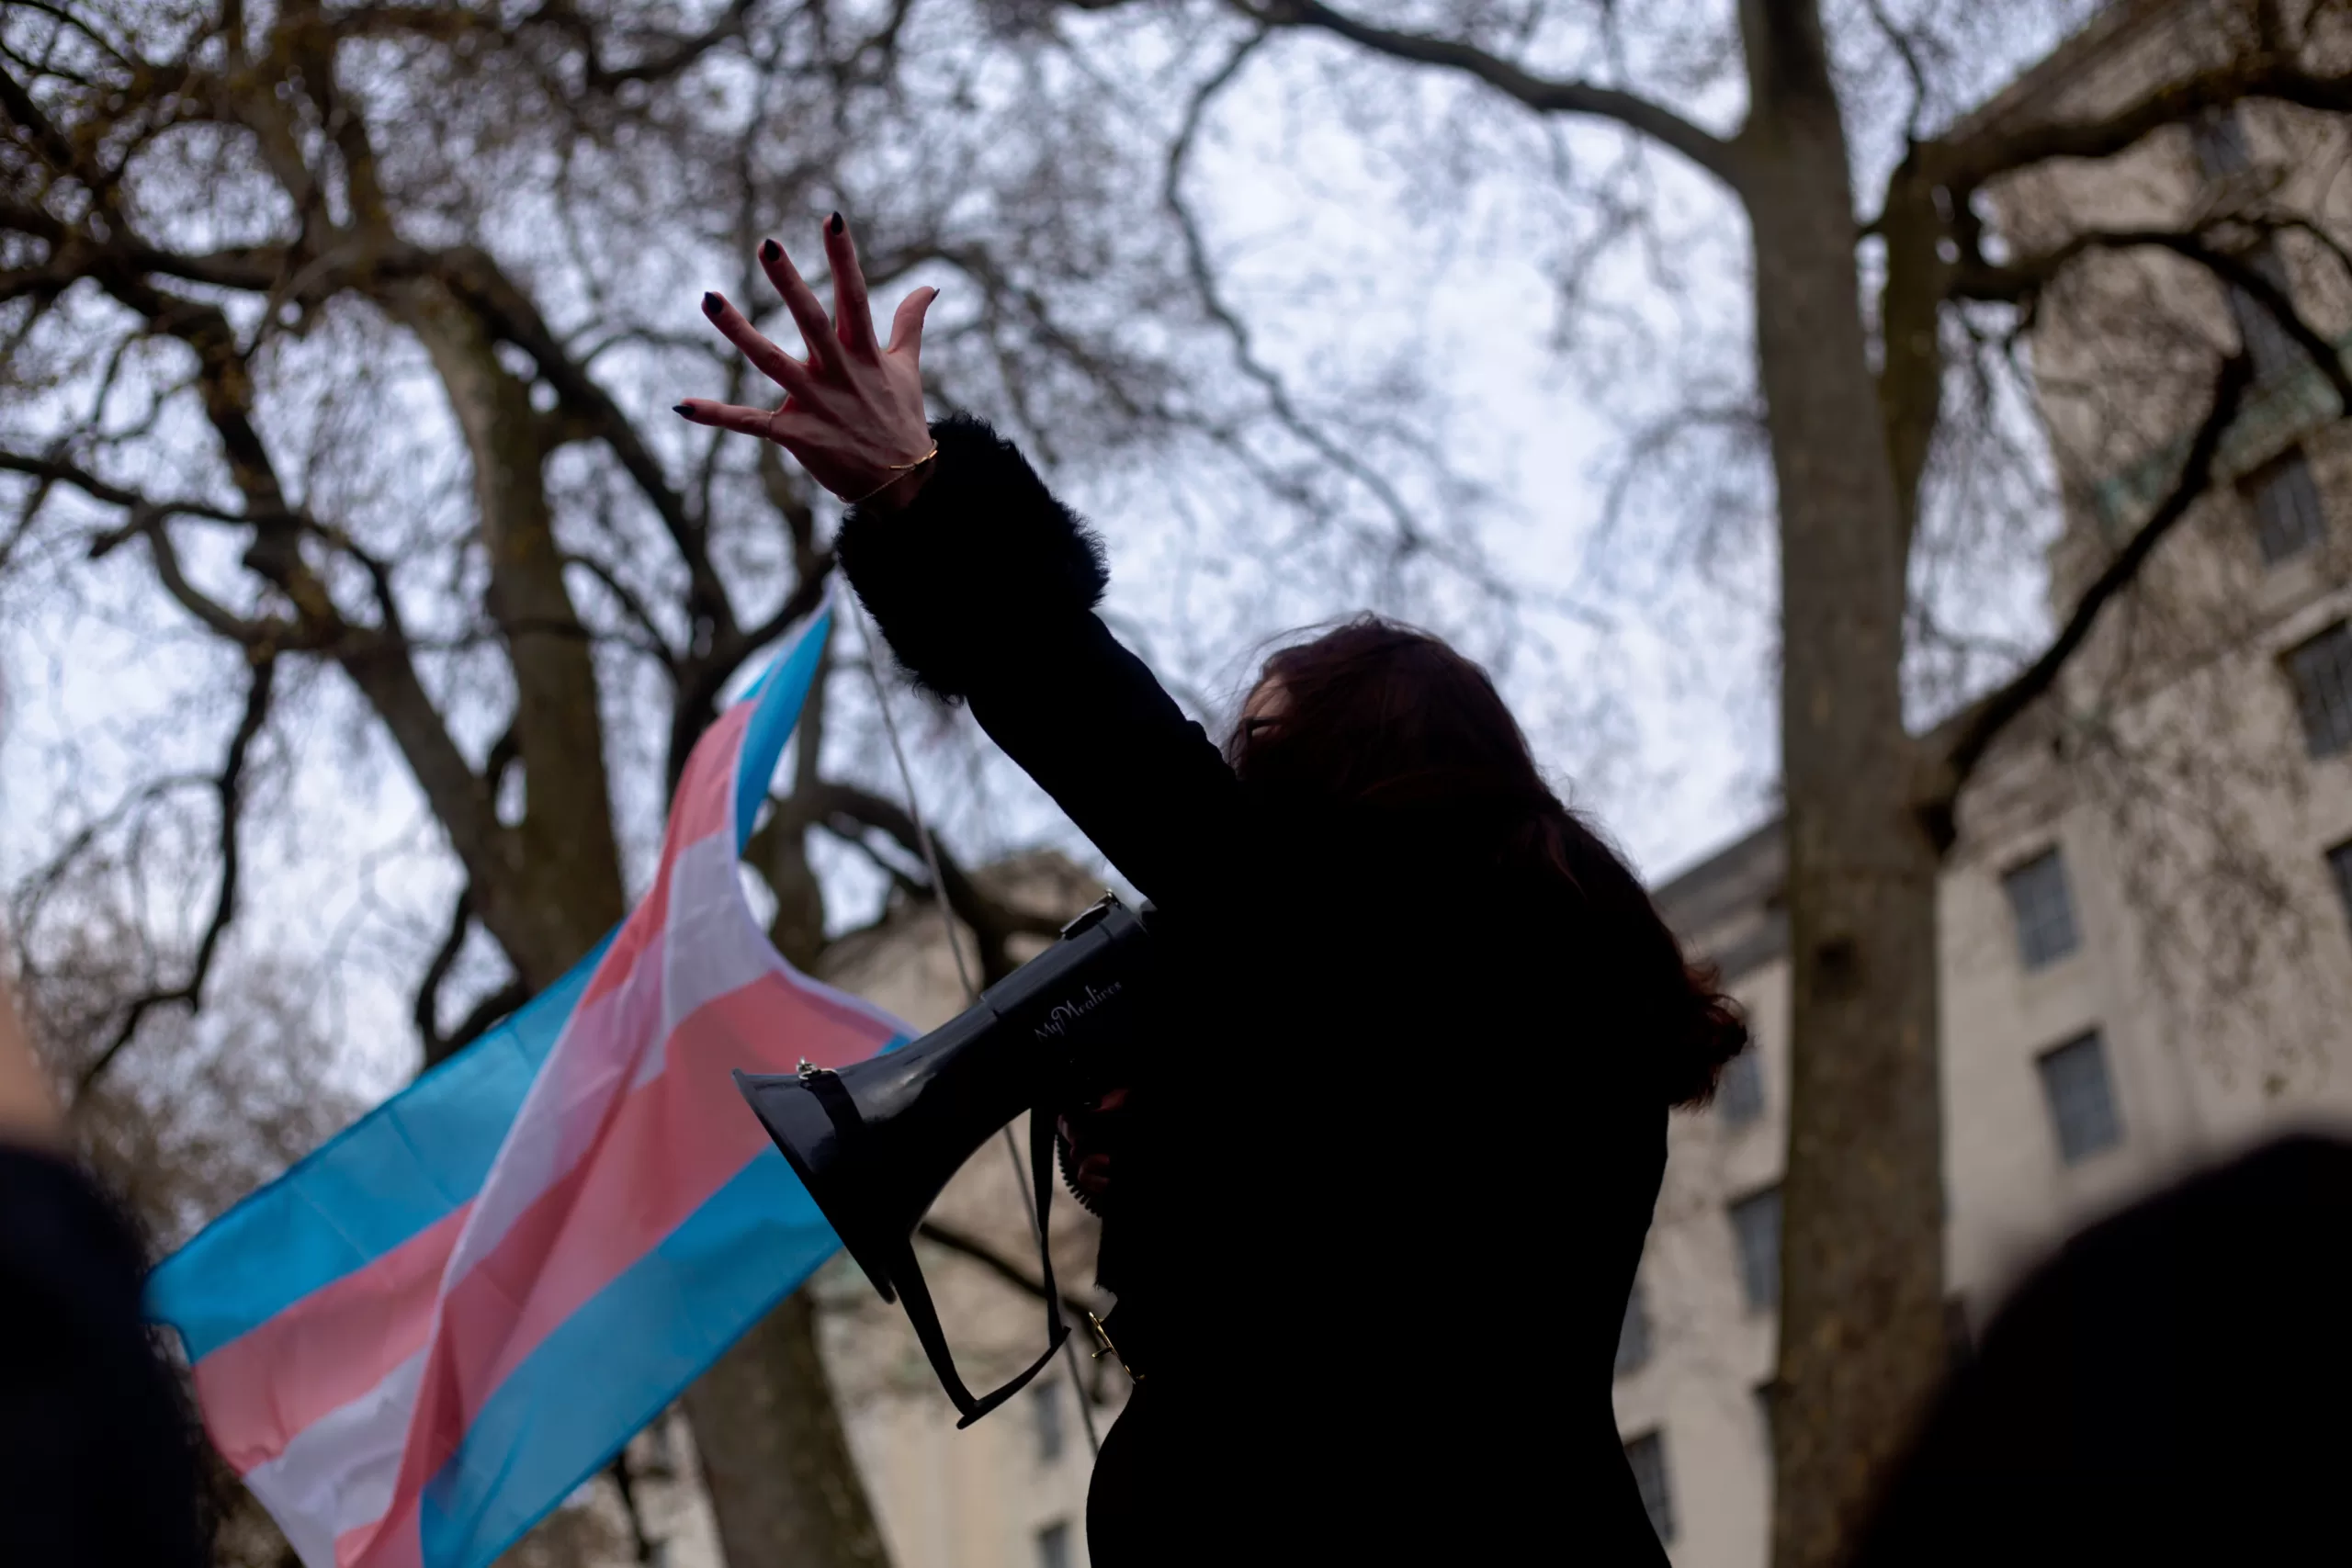 A photo of a person holding a trans flag and a megaphone